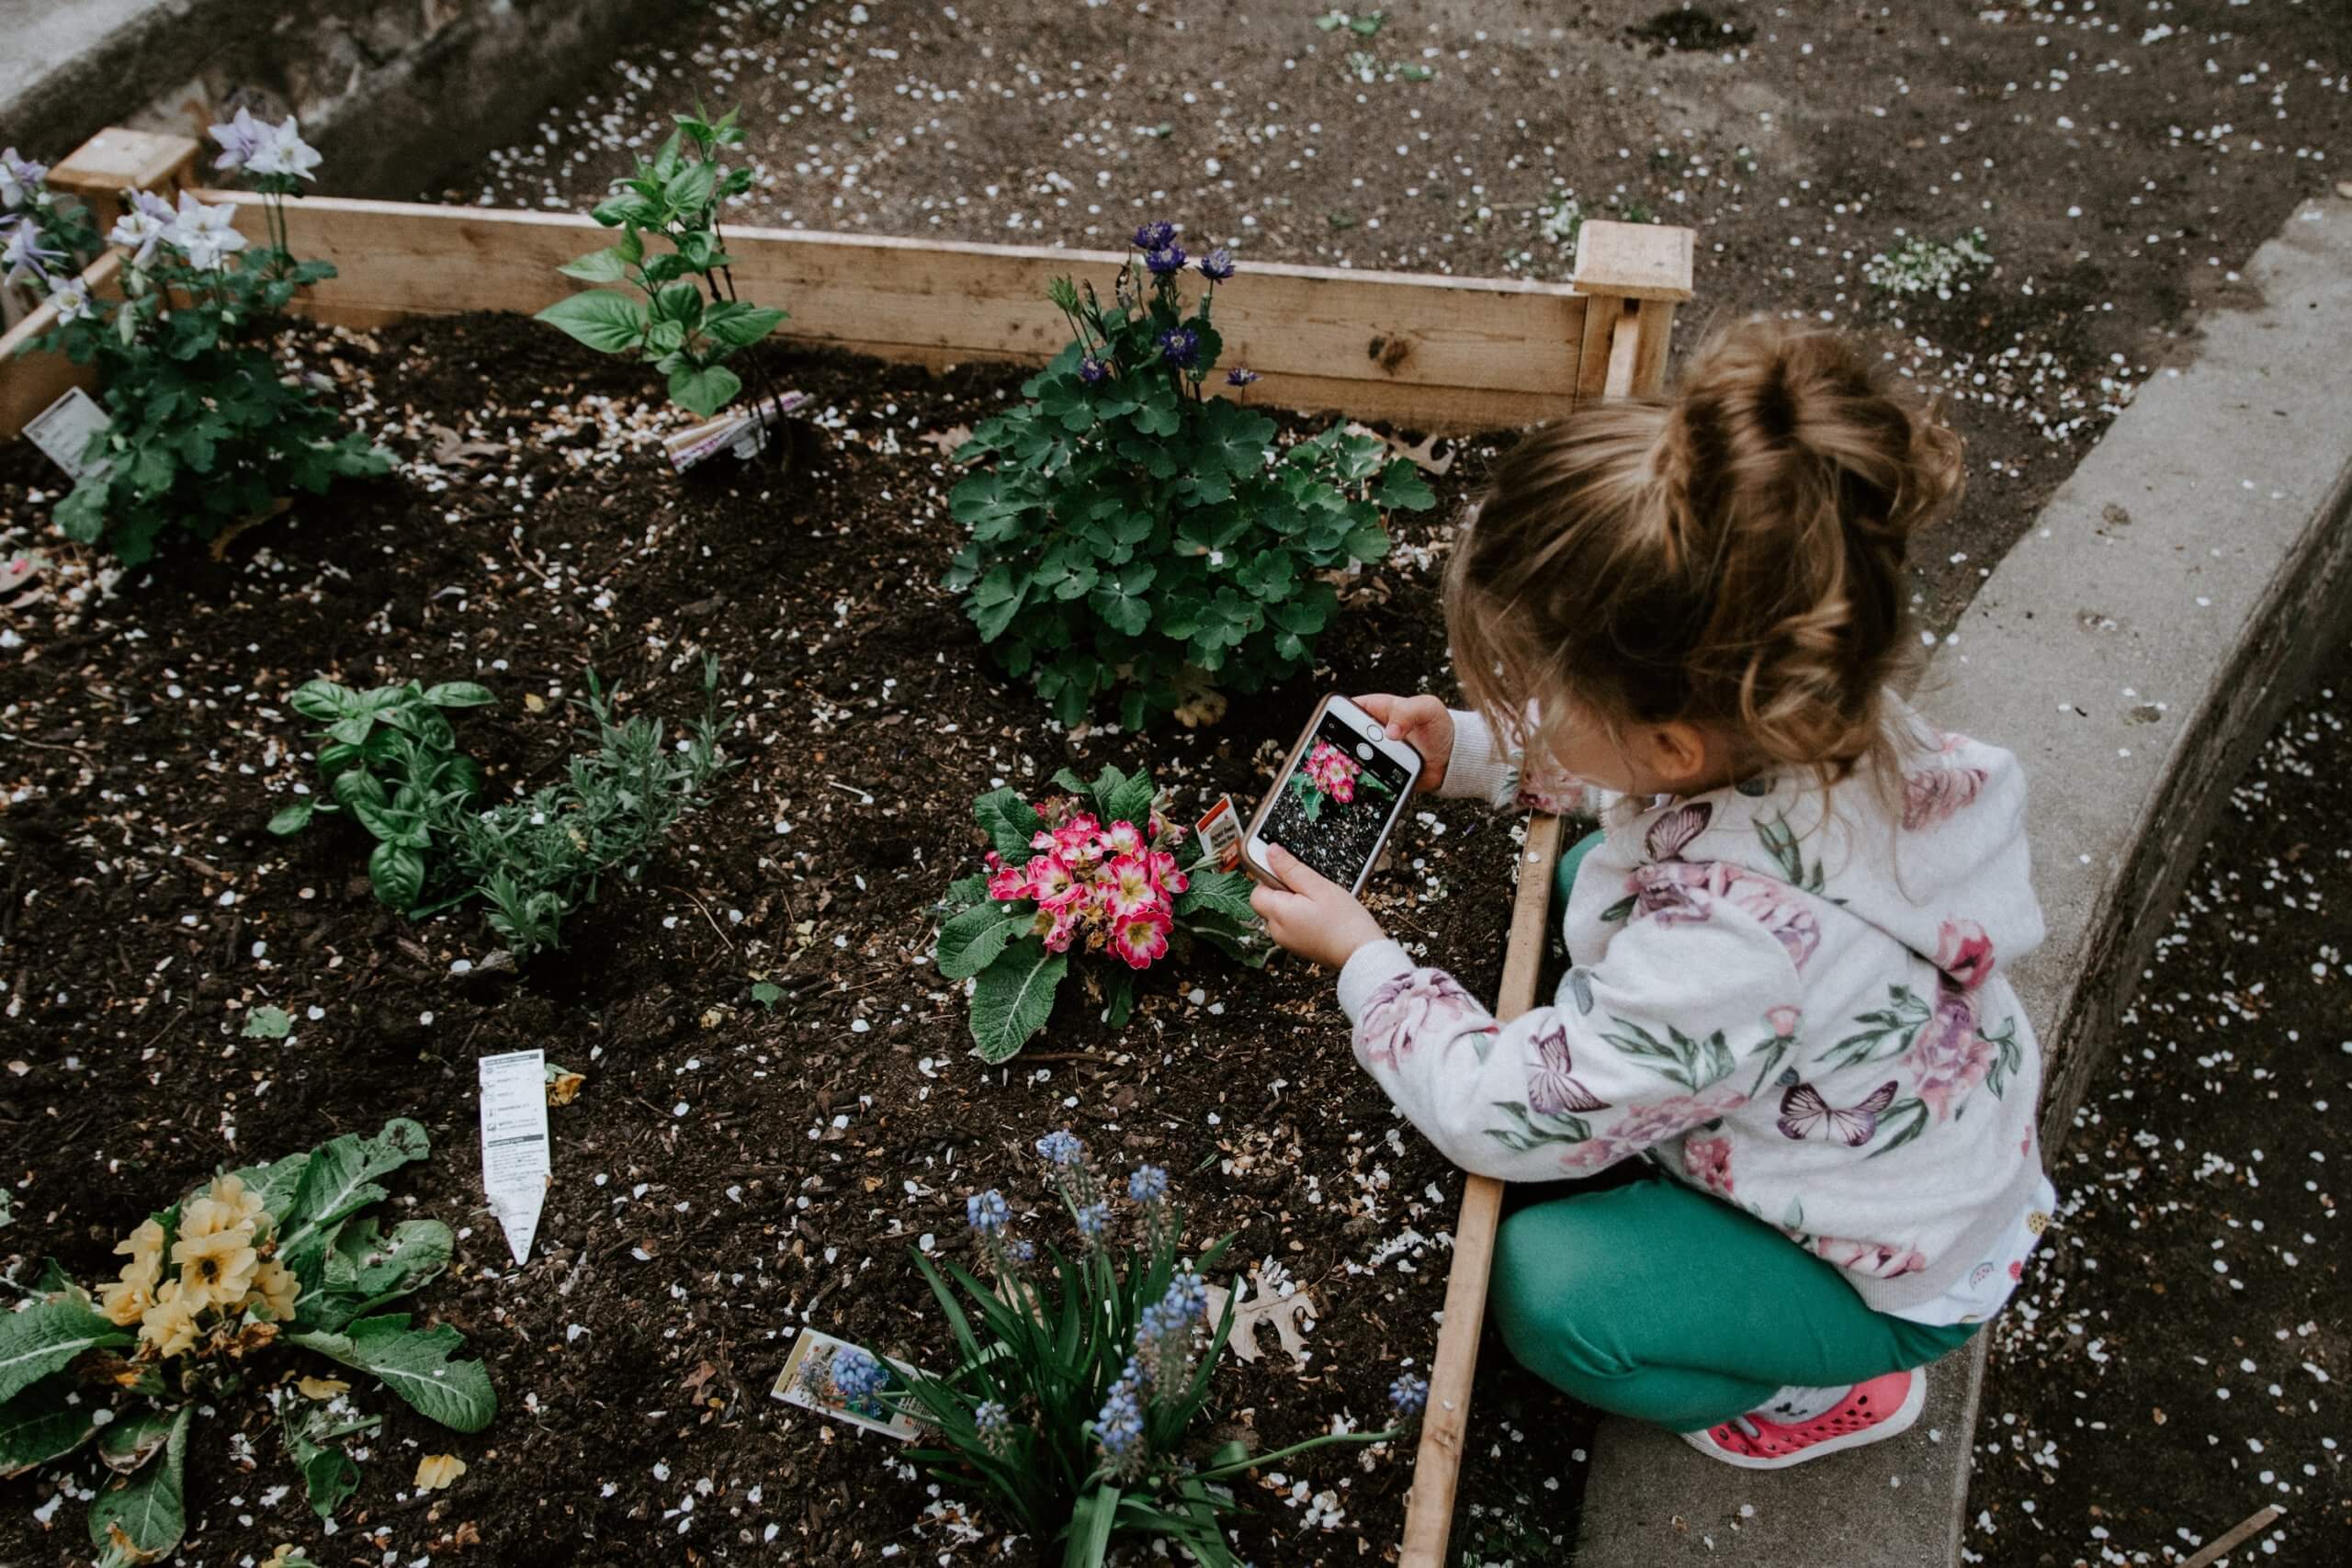 Little girl trying hr hand at garden photography